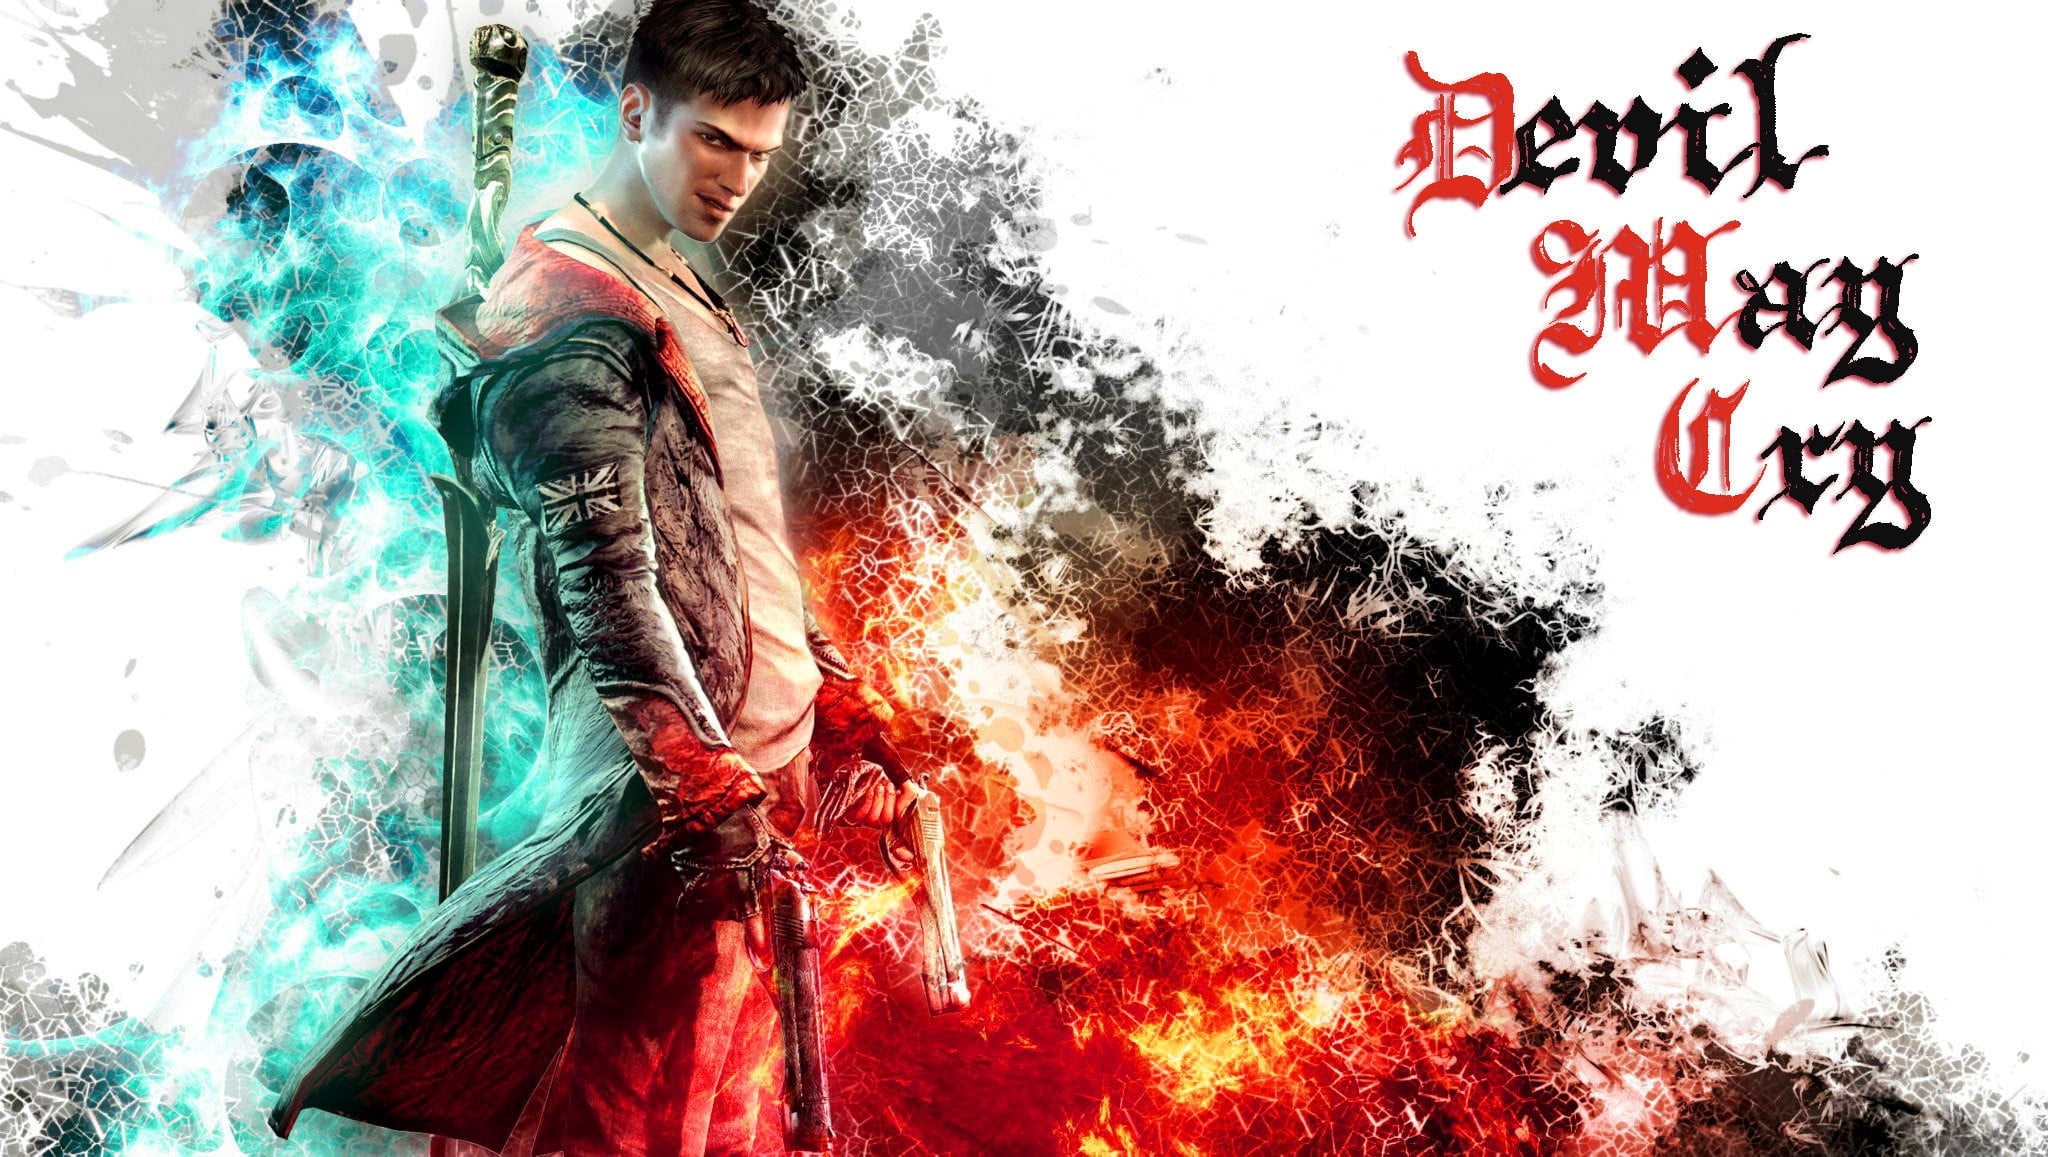 Devil May Cry wallpaper, Dante, pistol, sword, video games, one person